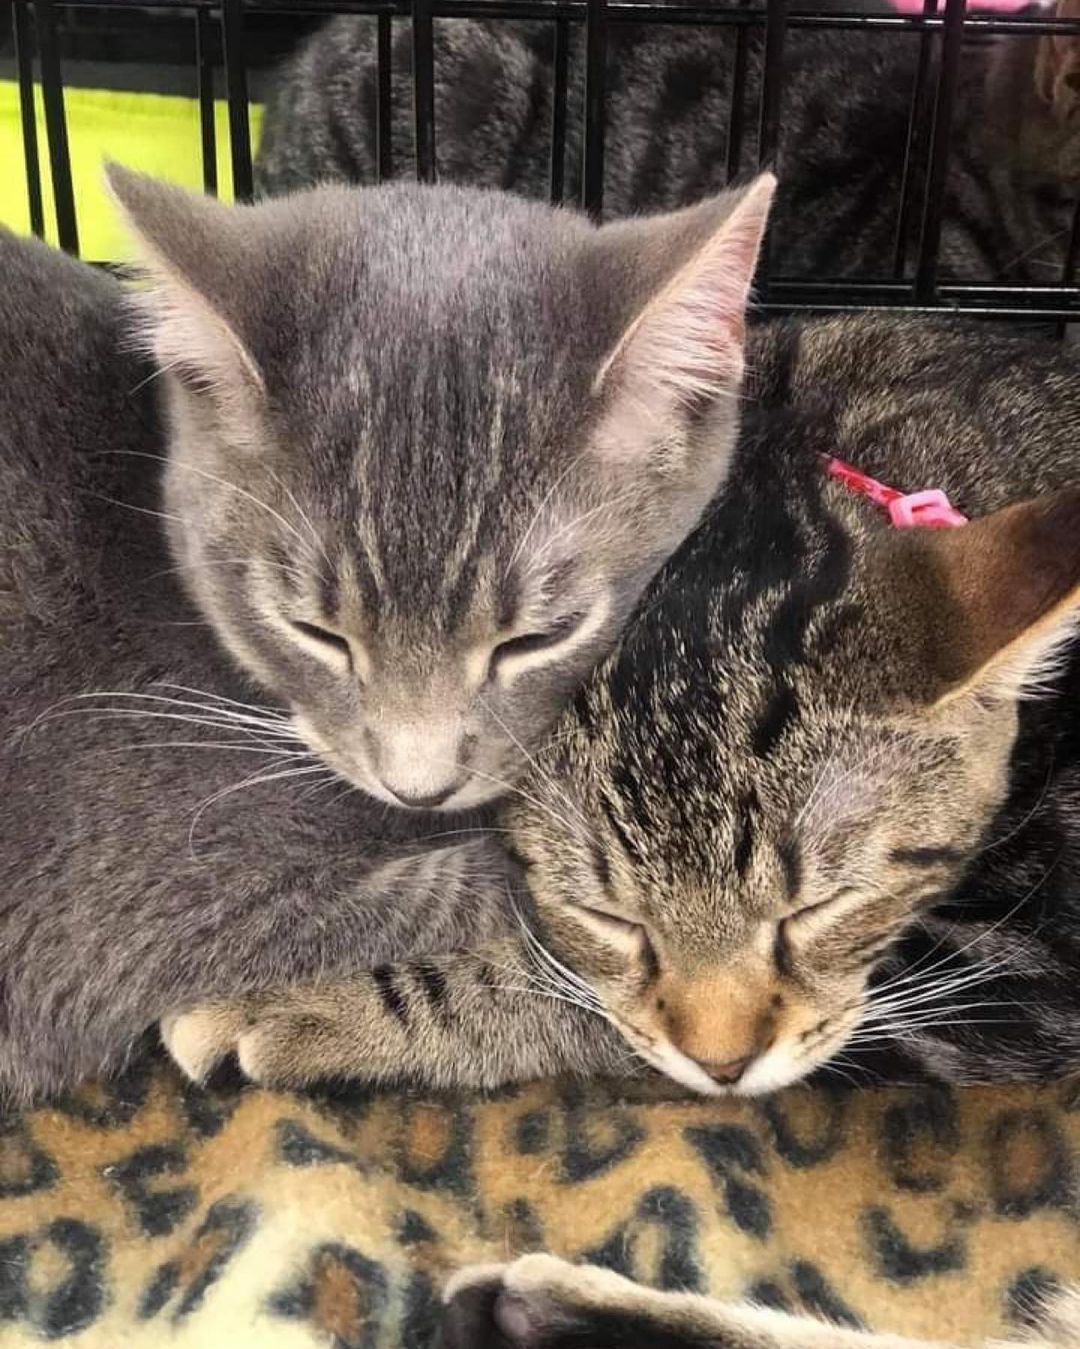 Chilly (striped tabby) and Hank (lighter gray) are available for adoption at the Dawsonville PetSmart. They’ve been foster buddies for almost 5 months now. Even in the habitat, they look out for one another. 

They both had a hard start in life but easily made the transition to spoiled house cats. Chilly loves to cuddle and gets along well with other cats and her canine foster sibling. 

Hank’s a little leary of dogs, and let’s his foster siblings push him around a little. He always eats last and doesn’t protest when a toy is taken from him. He’s still a happy boy though, and entertains his foster family with a tongue blep every day. 

It’s time for Chilly and Hank to begin their lives with their forever families. Could you be the one?  Email adoptions@fcpga.org to meet one (or both) of these beautiful cats. 

<a target='_blank' href='https://www.instagram.com/explore/tags/fcpga/'>#fcpga</a> <a target='_blank' href='https://www.instagram.com/explore/tags/petsmartcharities/'>#petsmartcharities</a> <a target='_blank' href='https://www.instagram.com/explore/tags/adoptdontshop/'>#adoptdontshop</a>